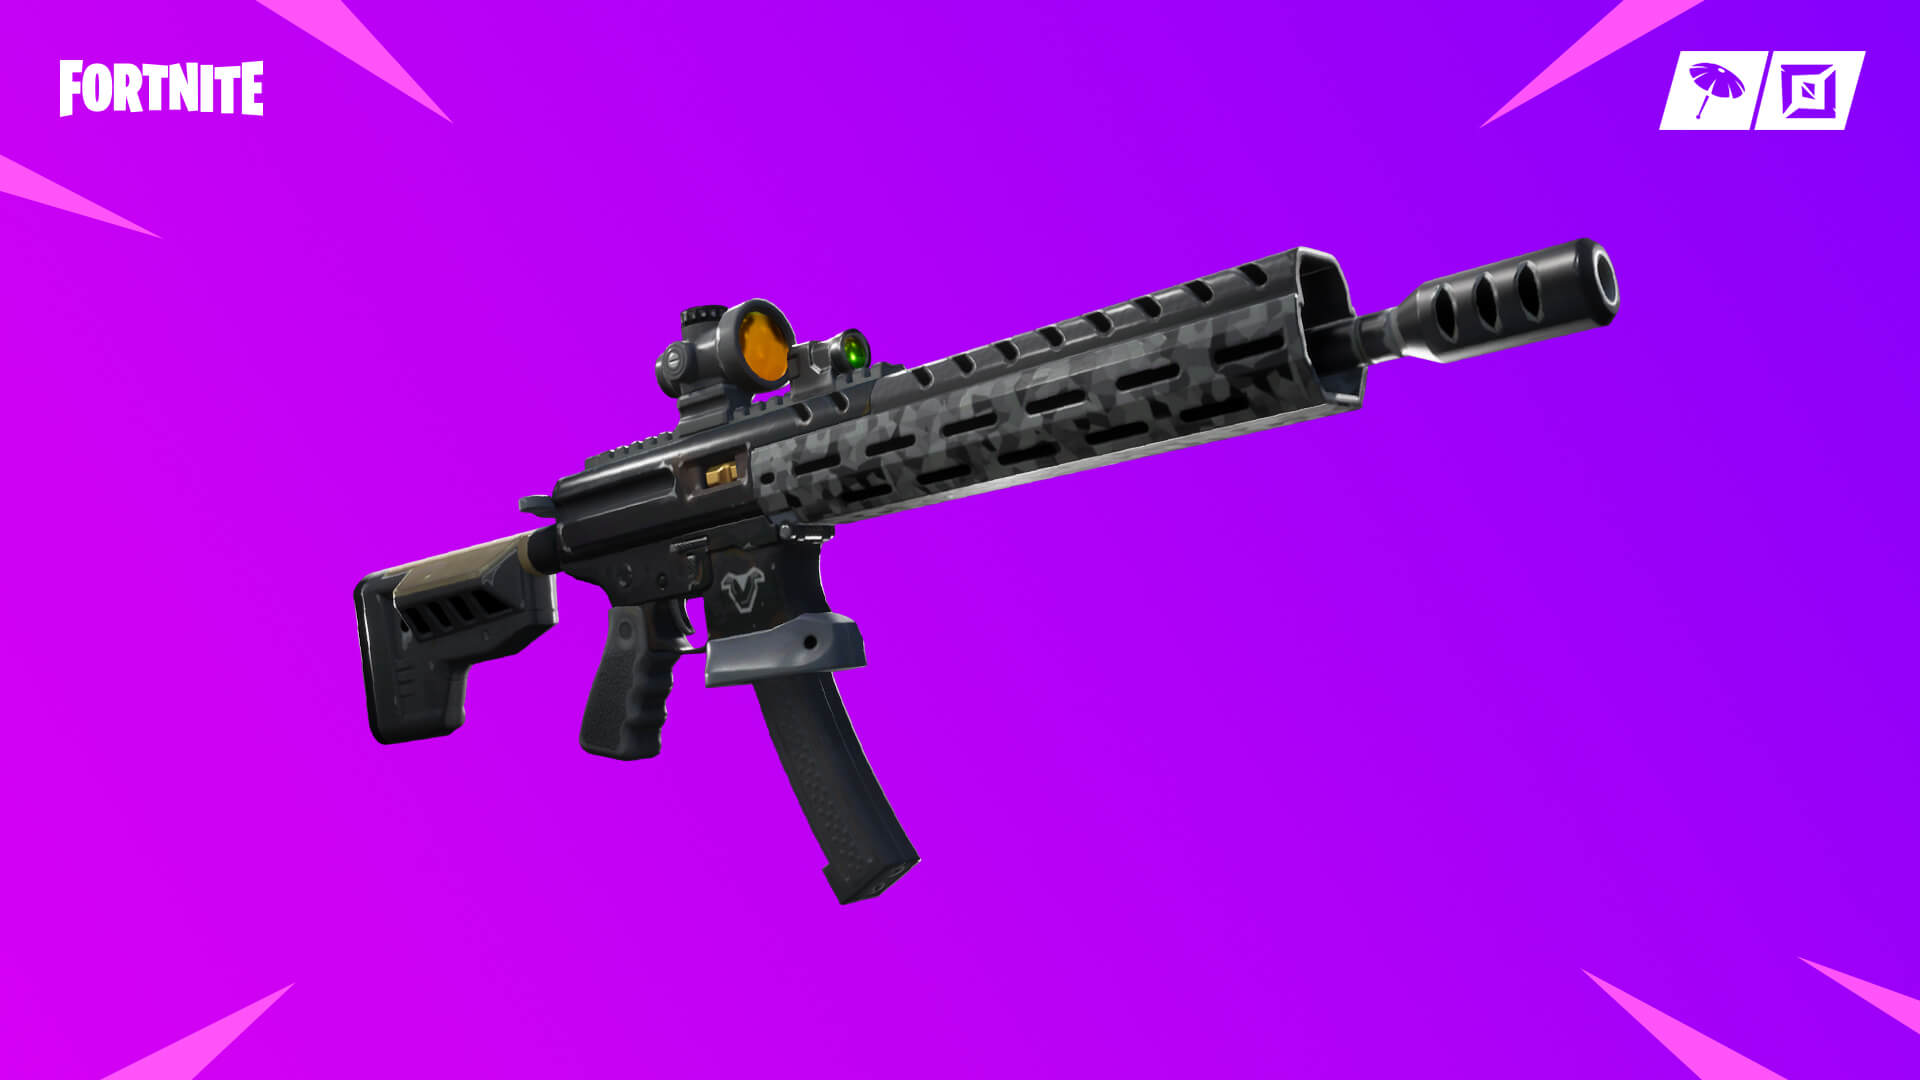 Fortnite patch notes v9 01 br header v9 01 00BR Weapon TacticalAssaultRifle Social 1 1920x1080 5ce8461cb28de23166b991fc38967aa846148fbe